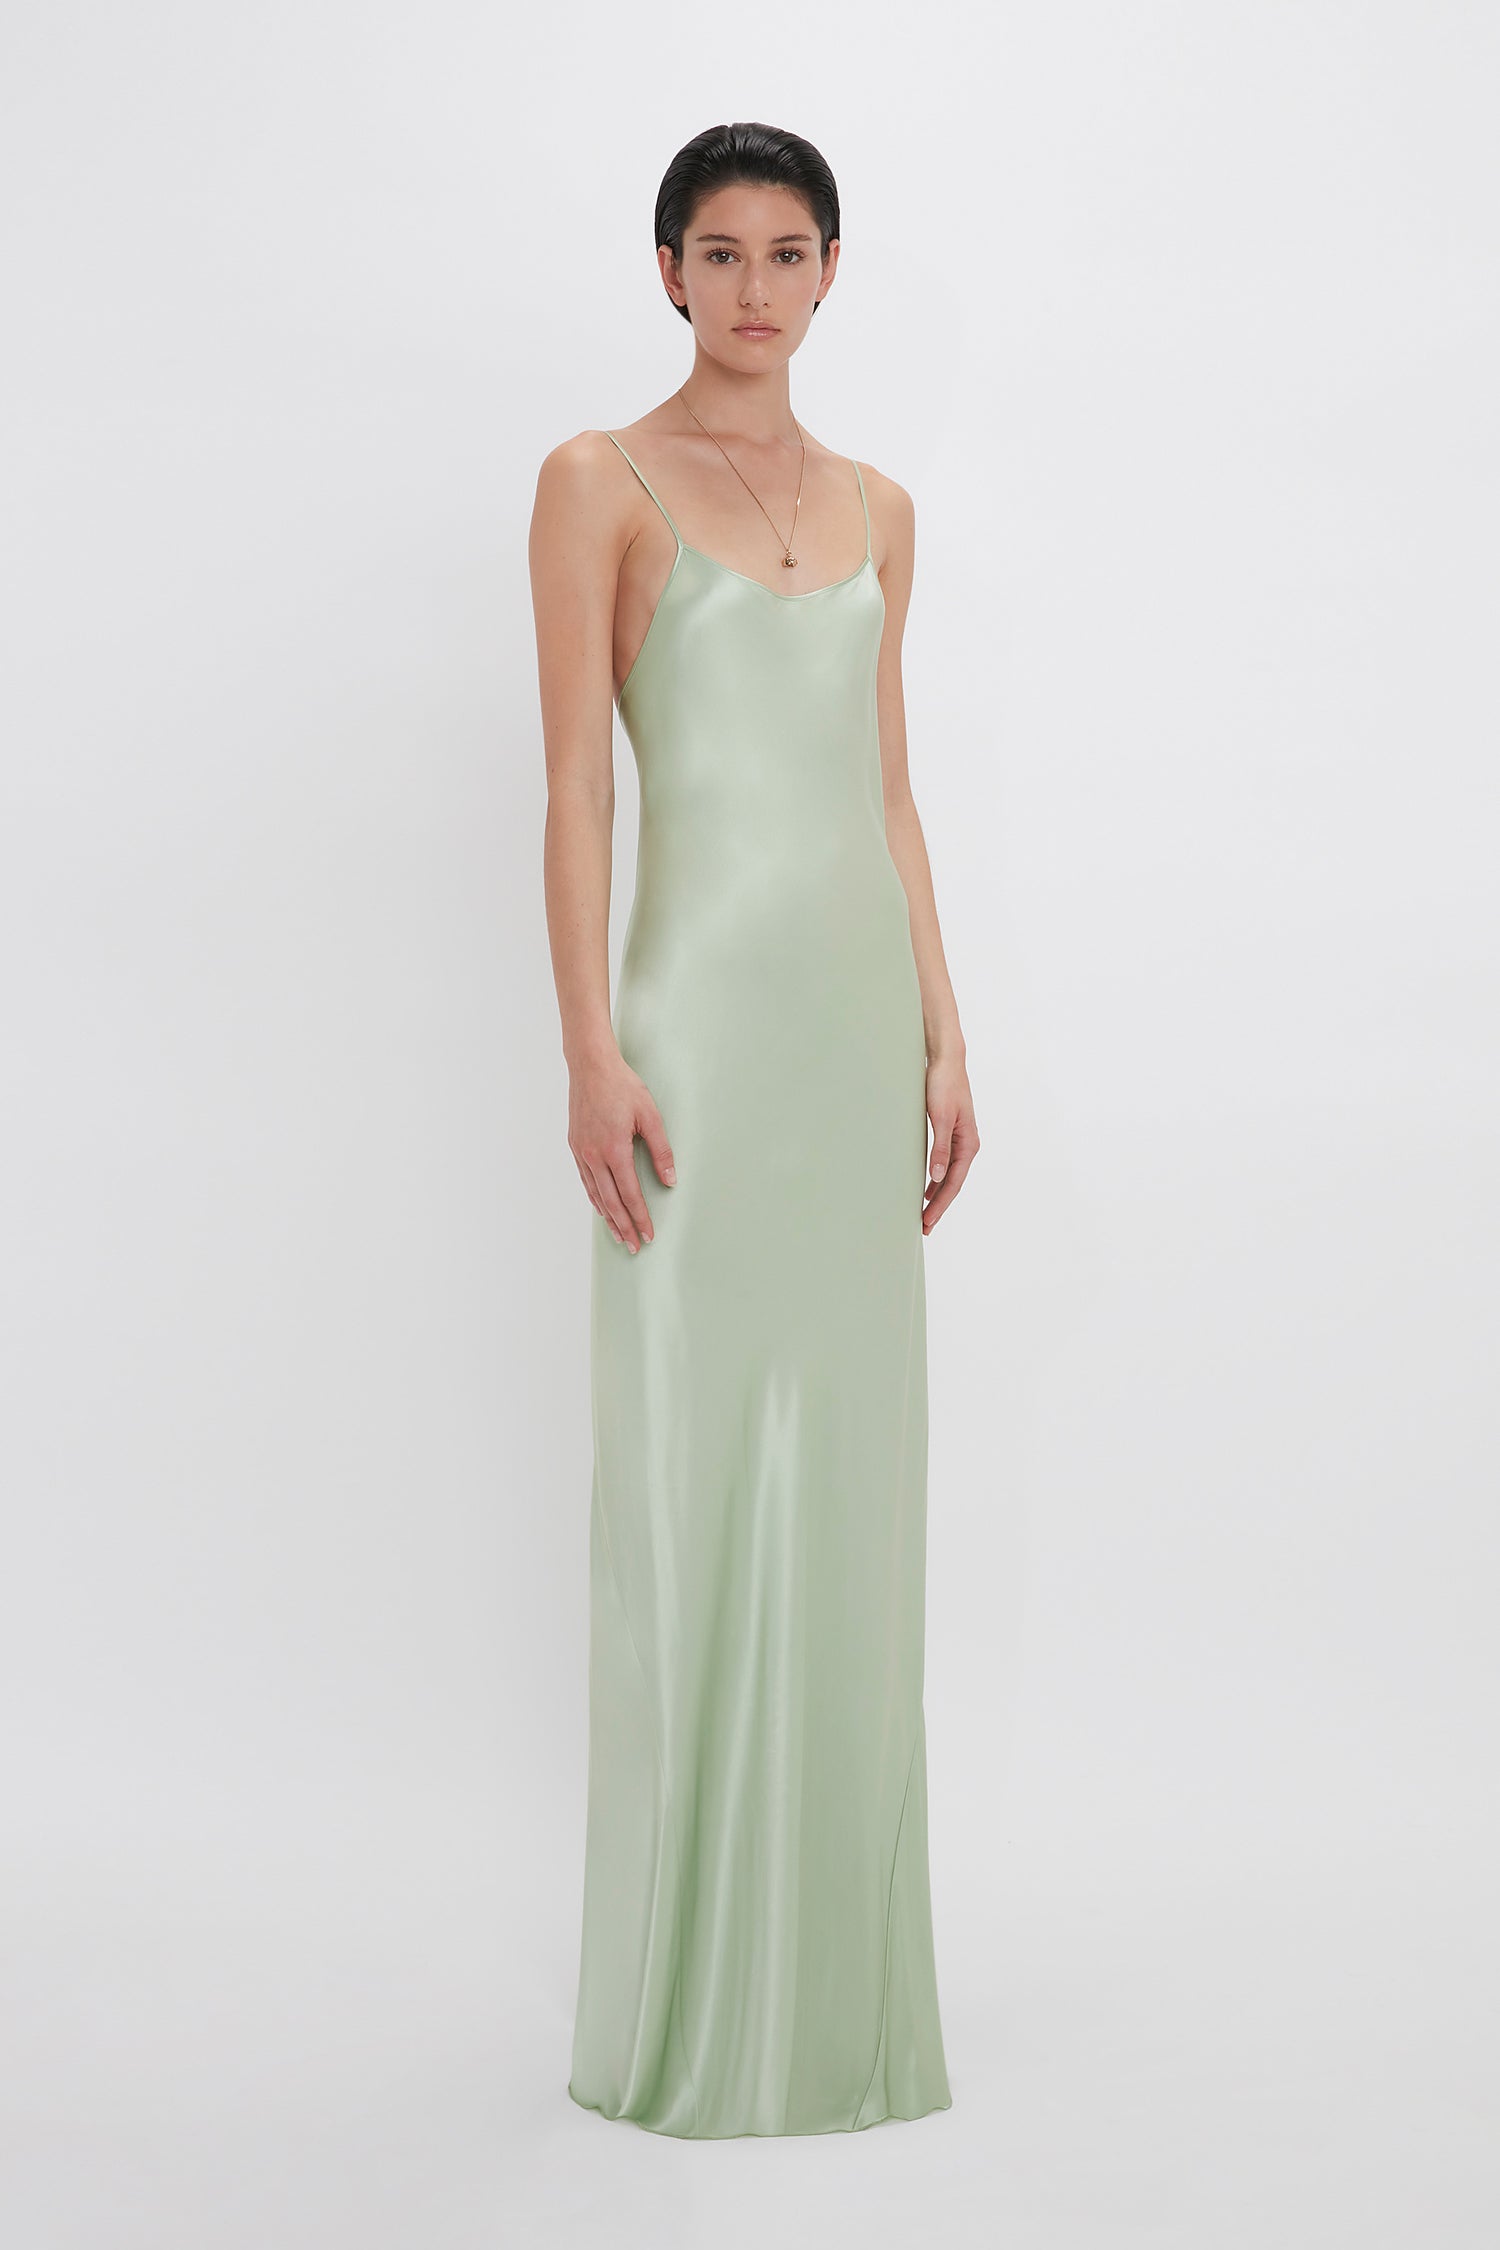 A woman stands against a white background wearing a long, light green Exclusive Low Back Cami Floor-Length Dress in Jade by Victoria Beckham with thin straps and a delicate camellia flower necklace.